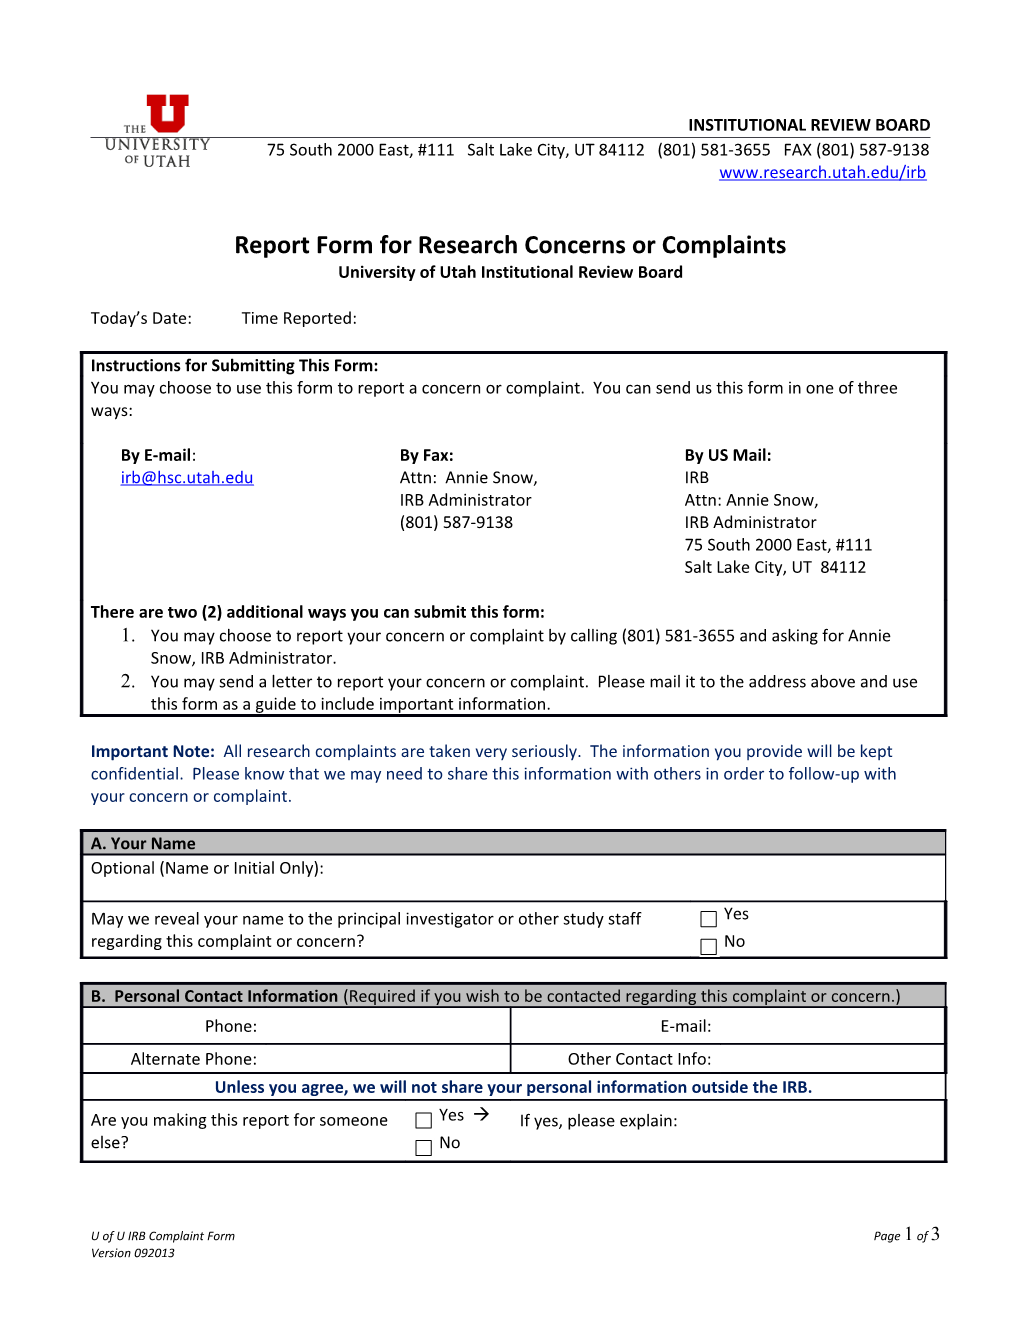 Reporting Form for Research